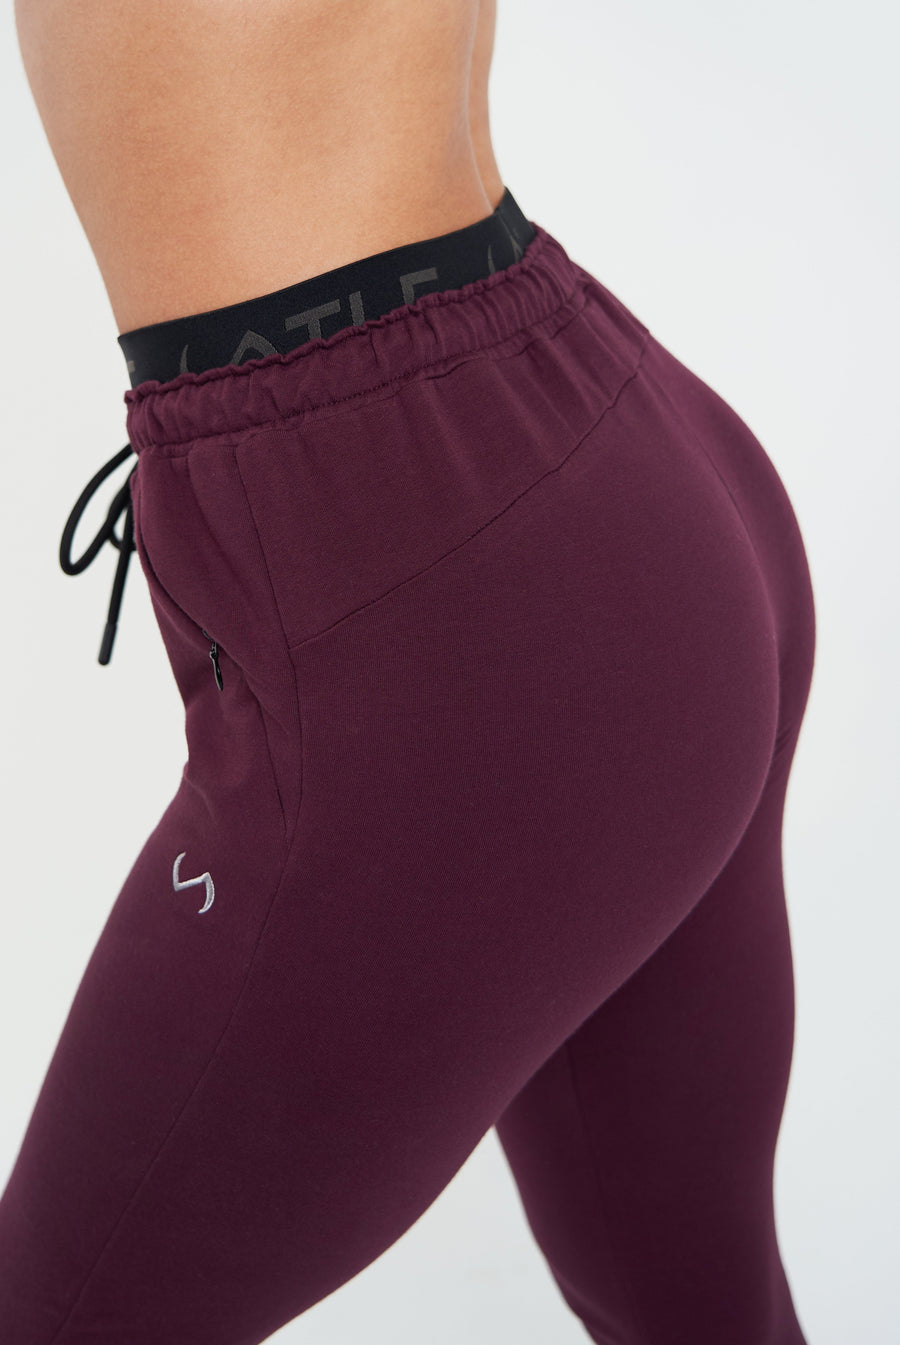 Tlf-All-Day-Ease-Comfy-Joggers-Wine 5